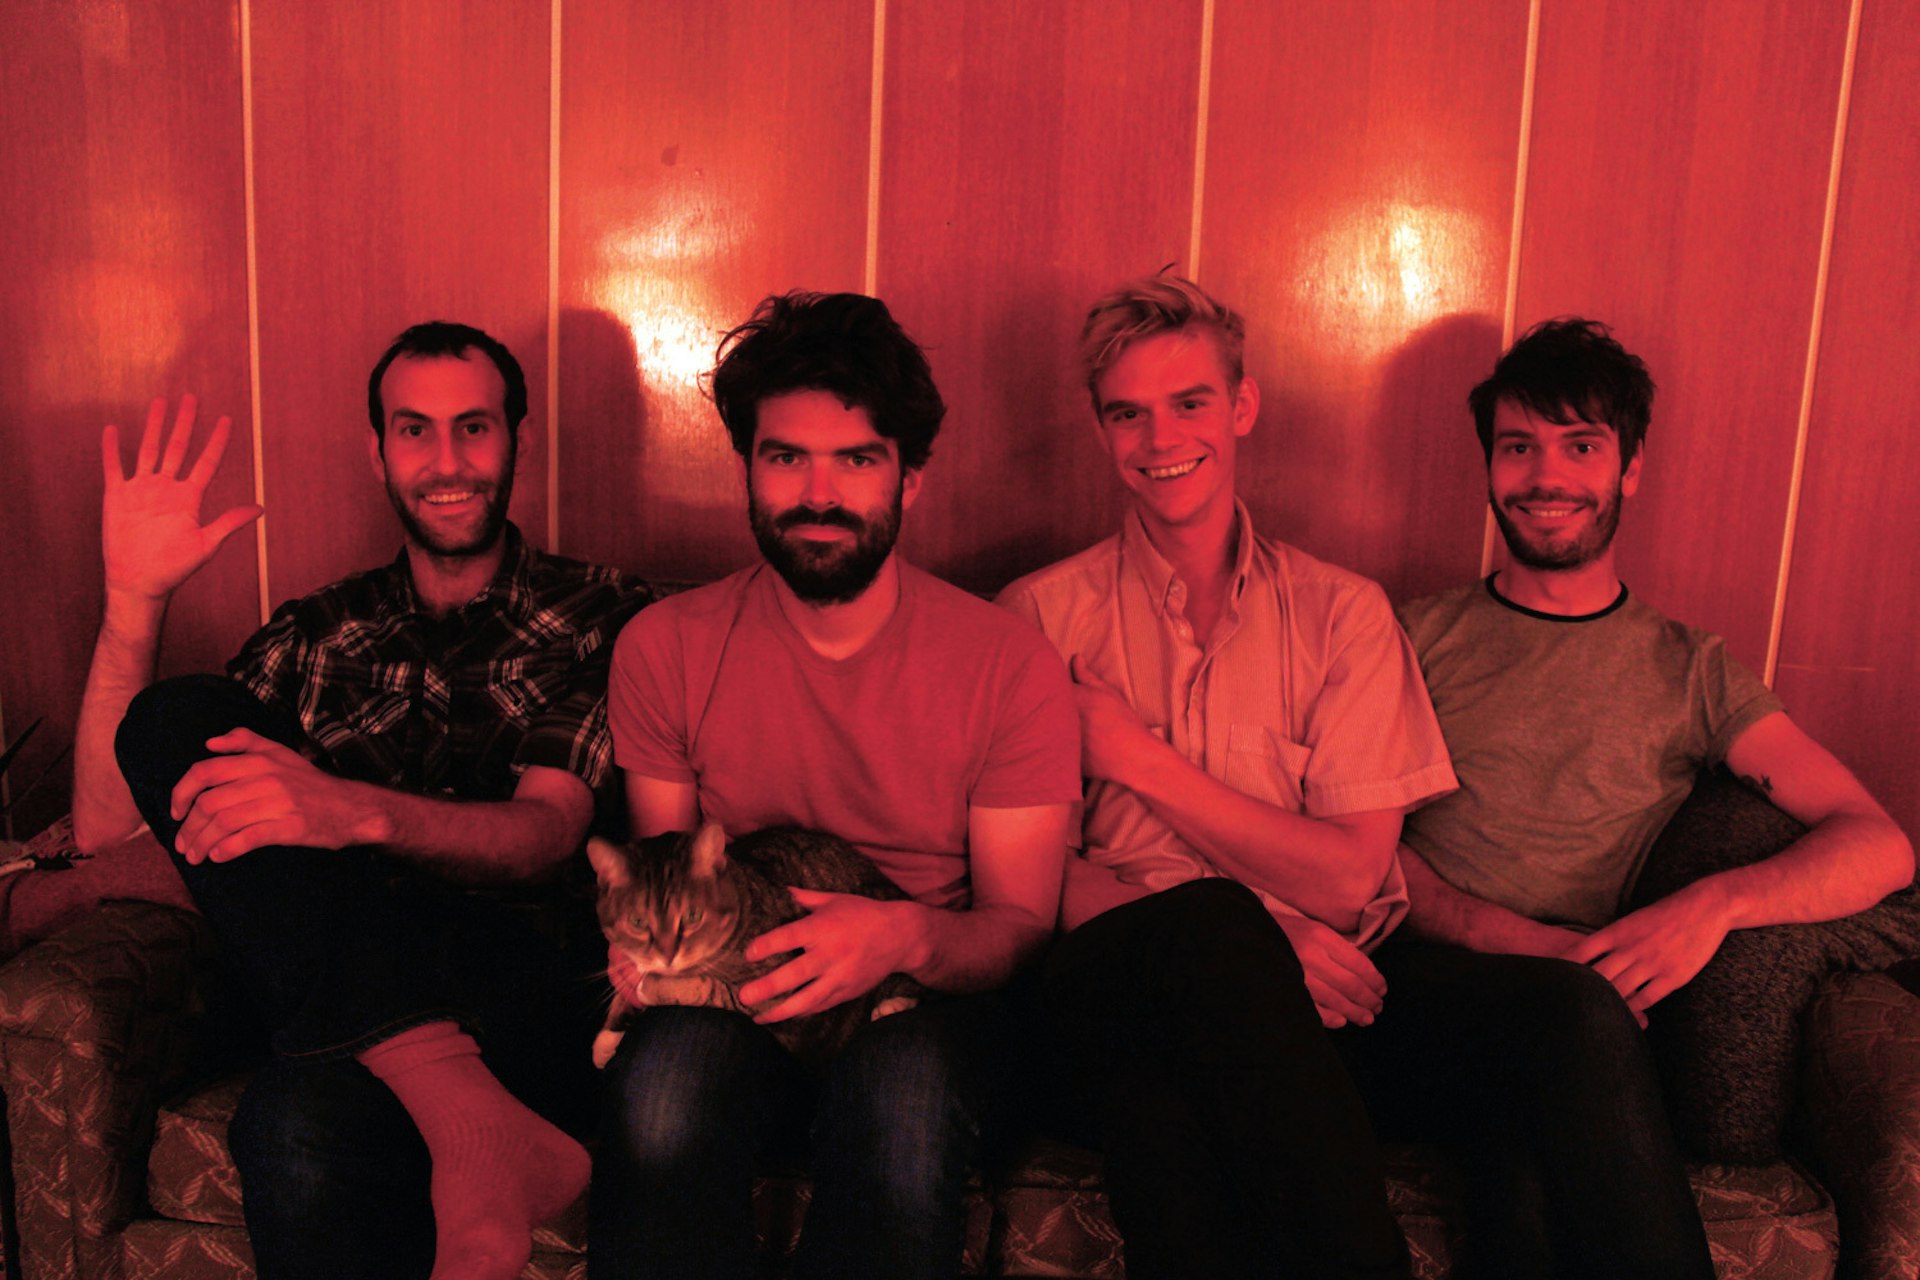 Canadian winters, communist wars and late-90s inertia: Meet post-punk band Viet Cong